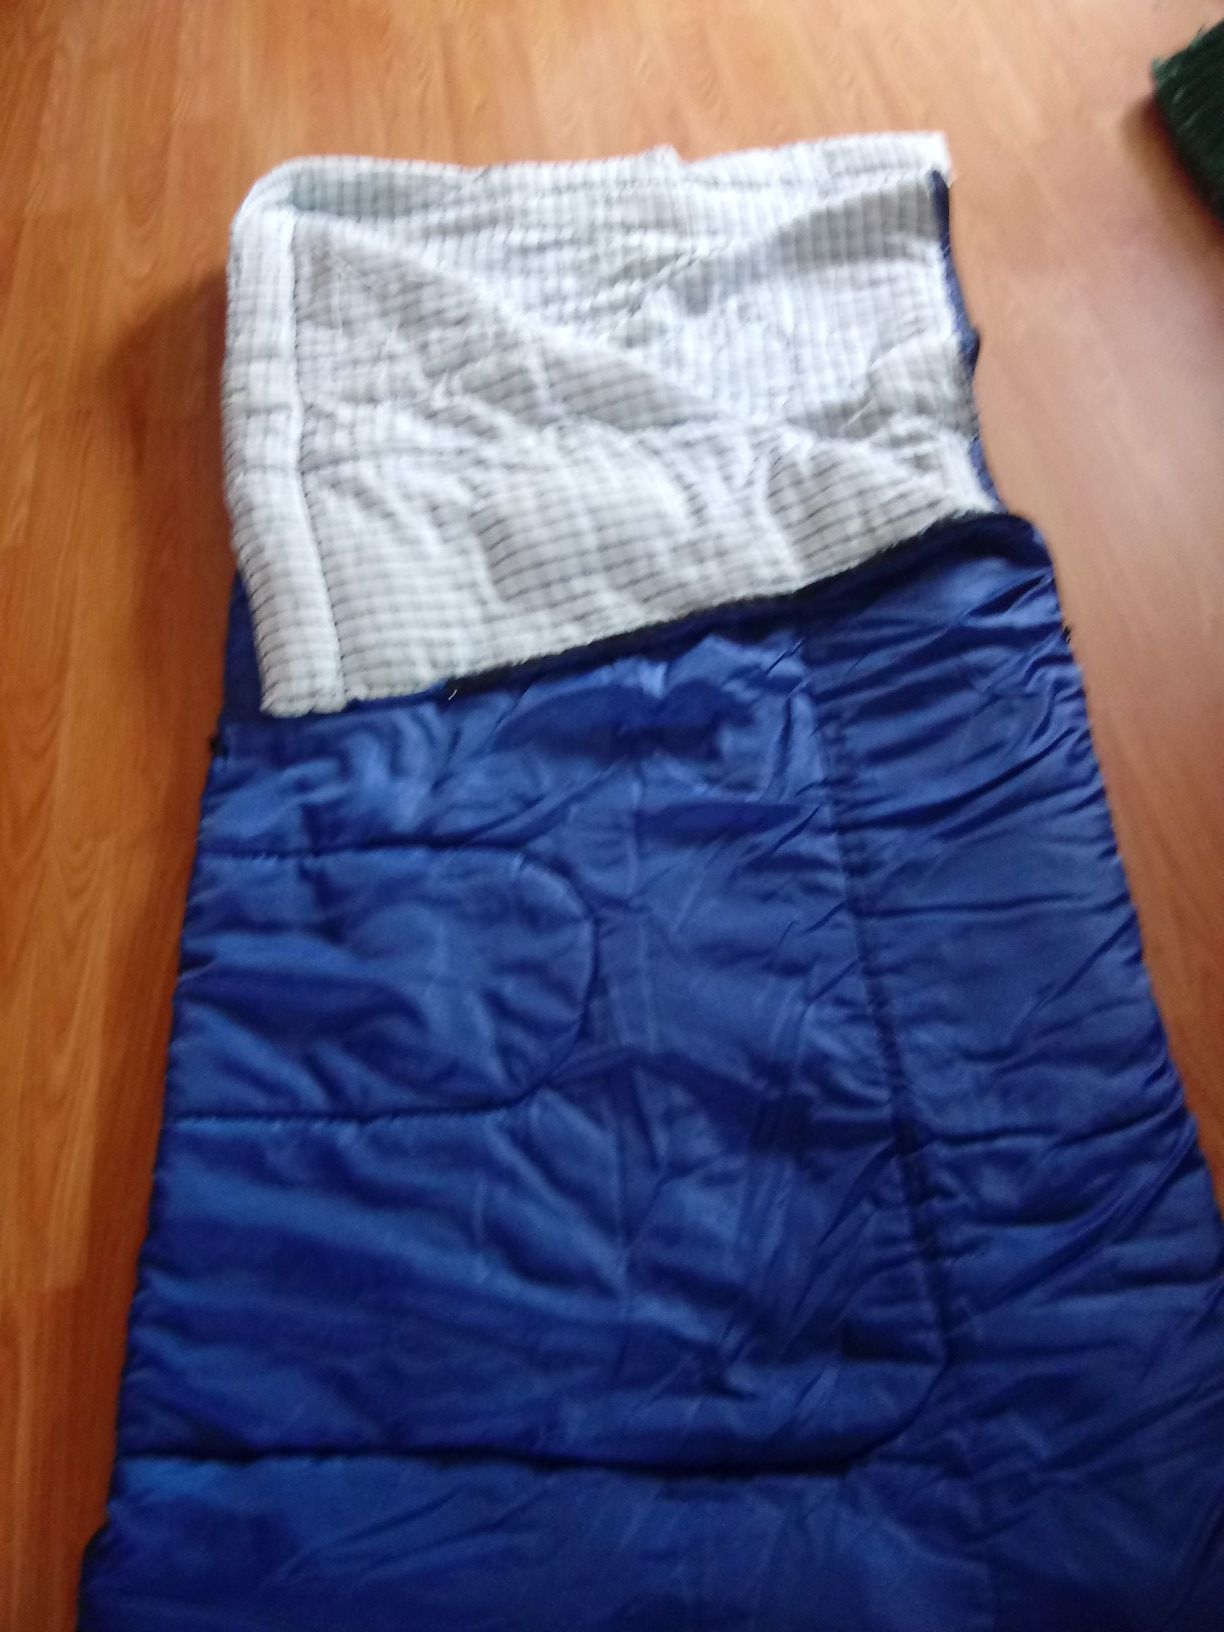 Blue Coleman sleeping bag with pellets inside USED BUT IN GREAT CONDITION